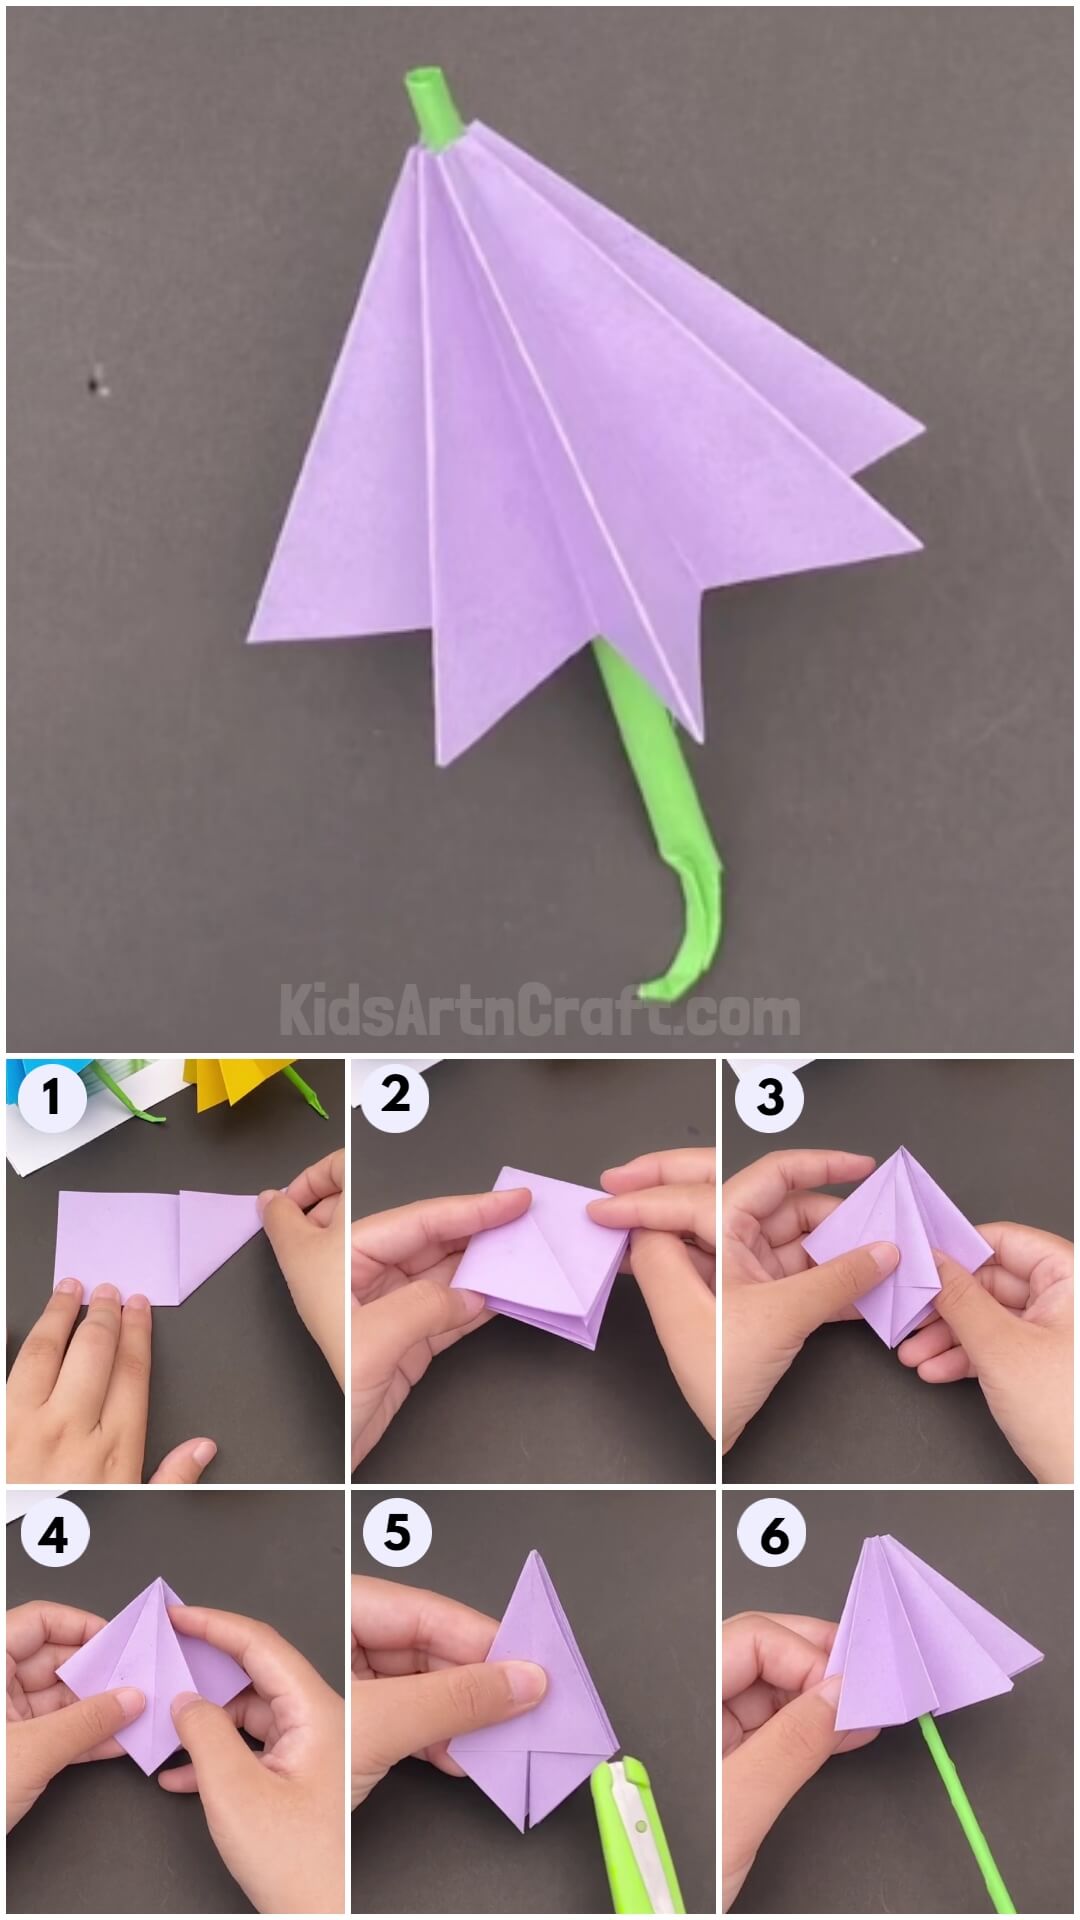  A Guide to Making Your Own Origami Cocktail Umbrella for Novices